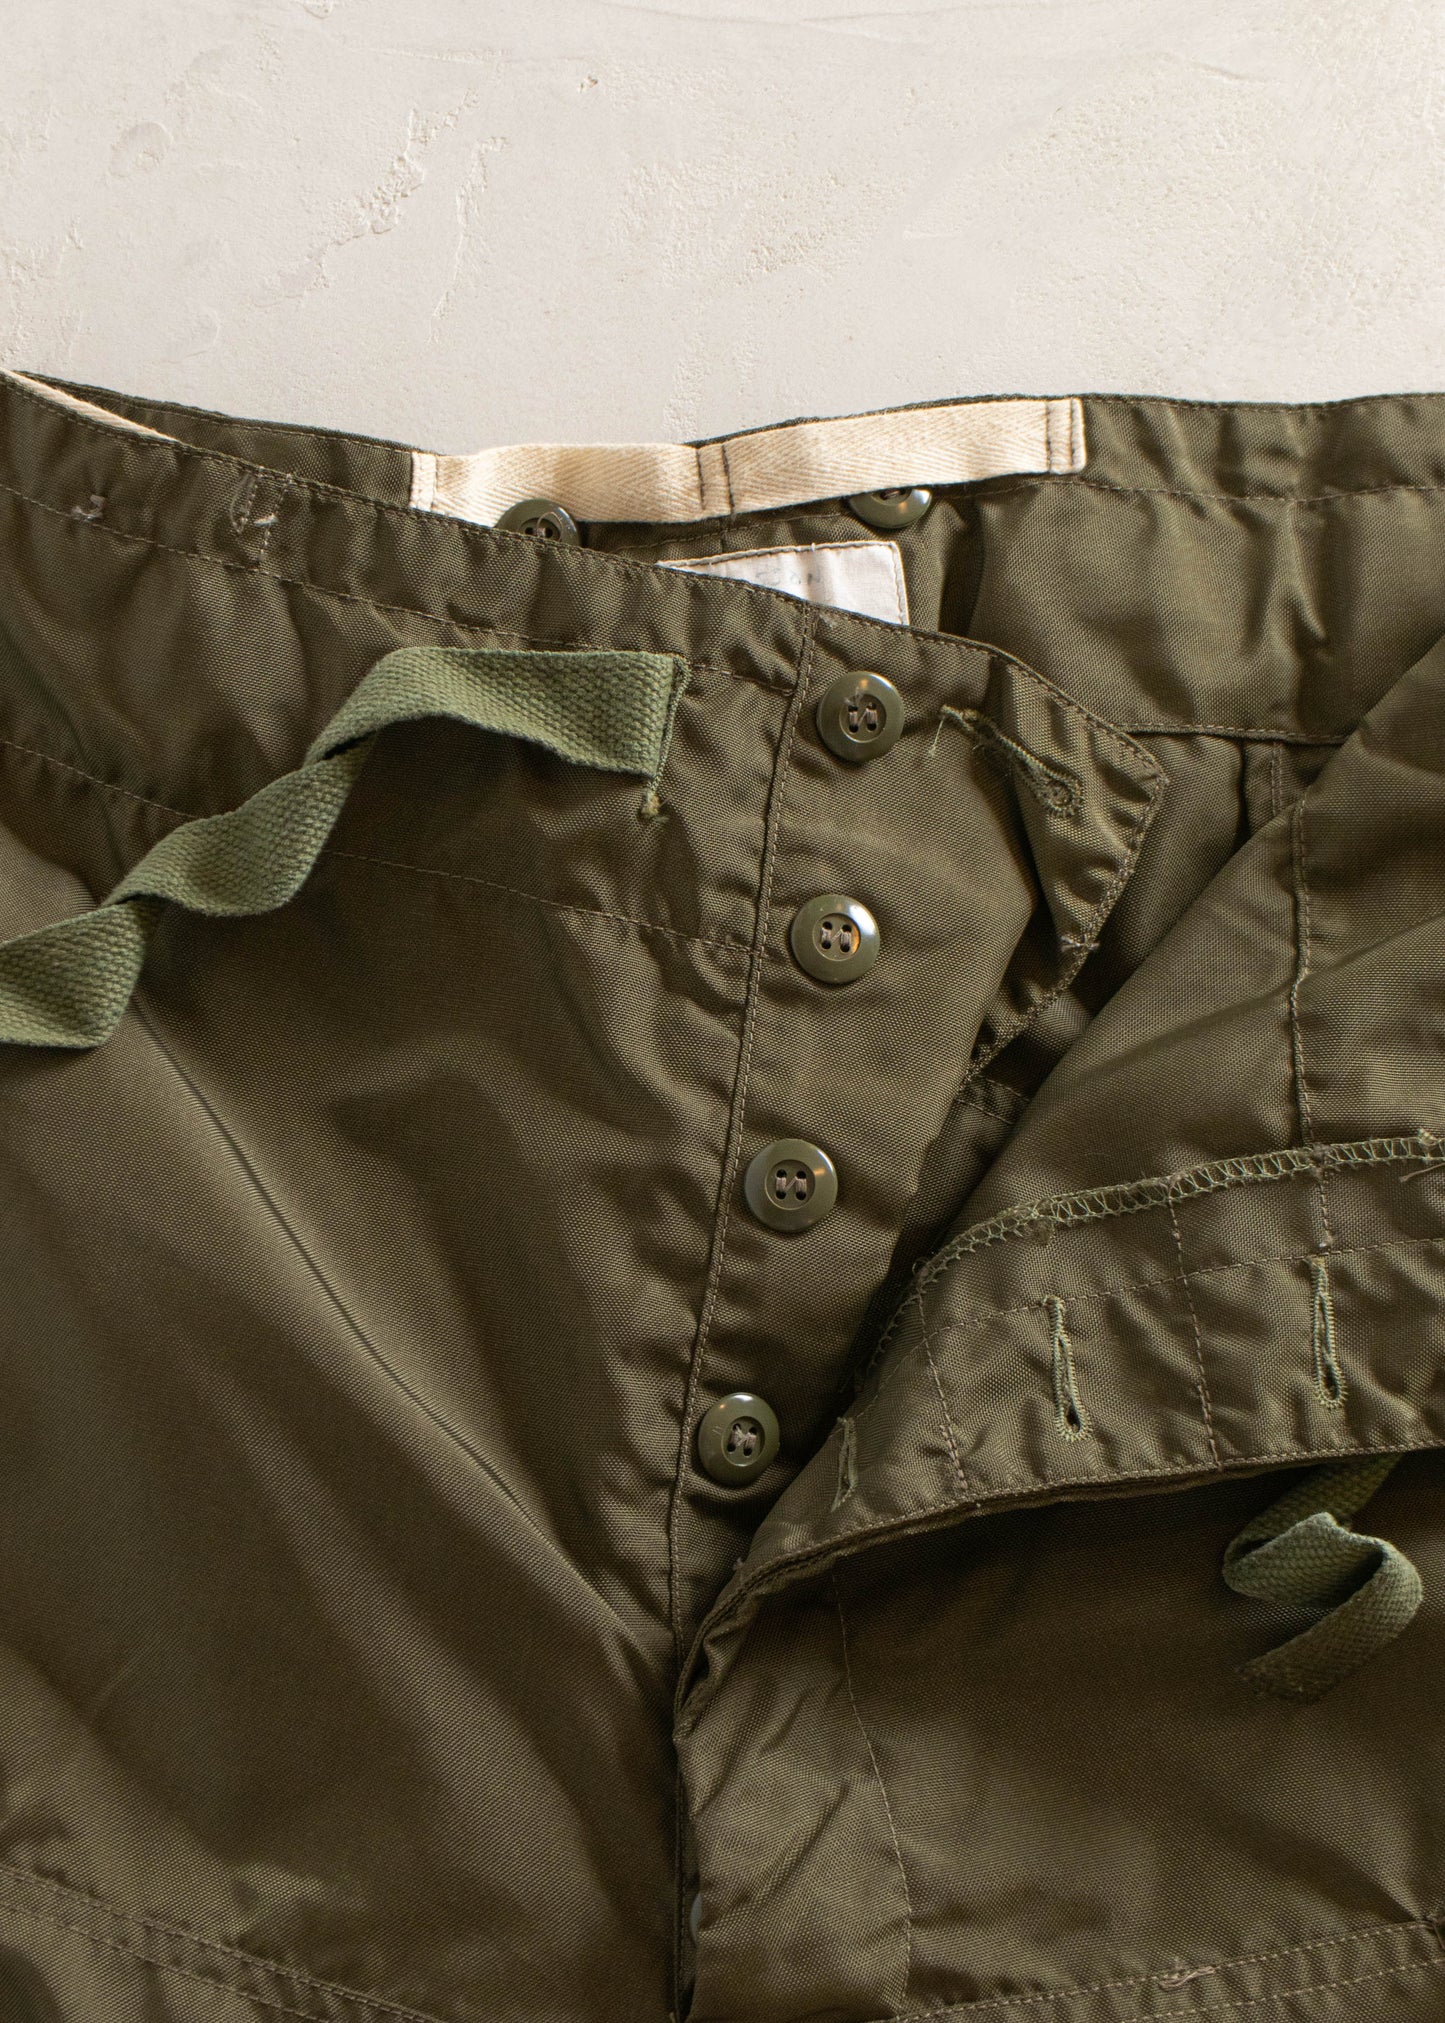 1970s Military Wind Cargo Pants Size 2XL/3XL